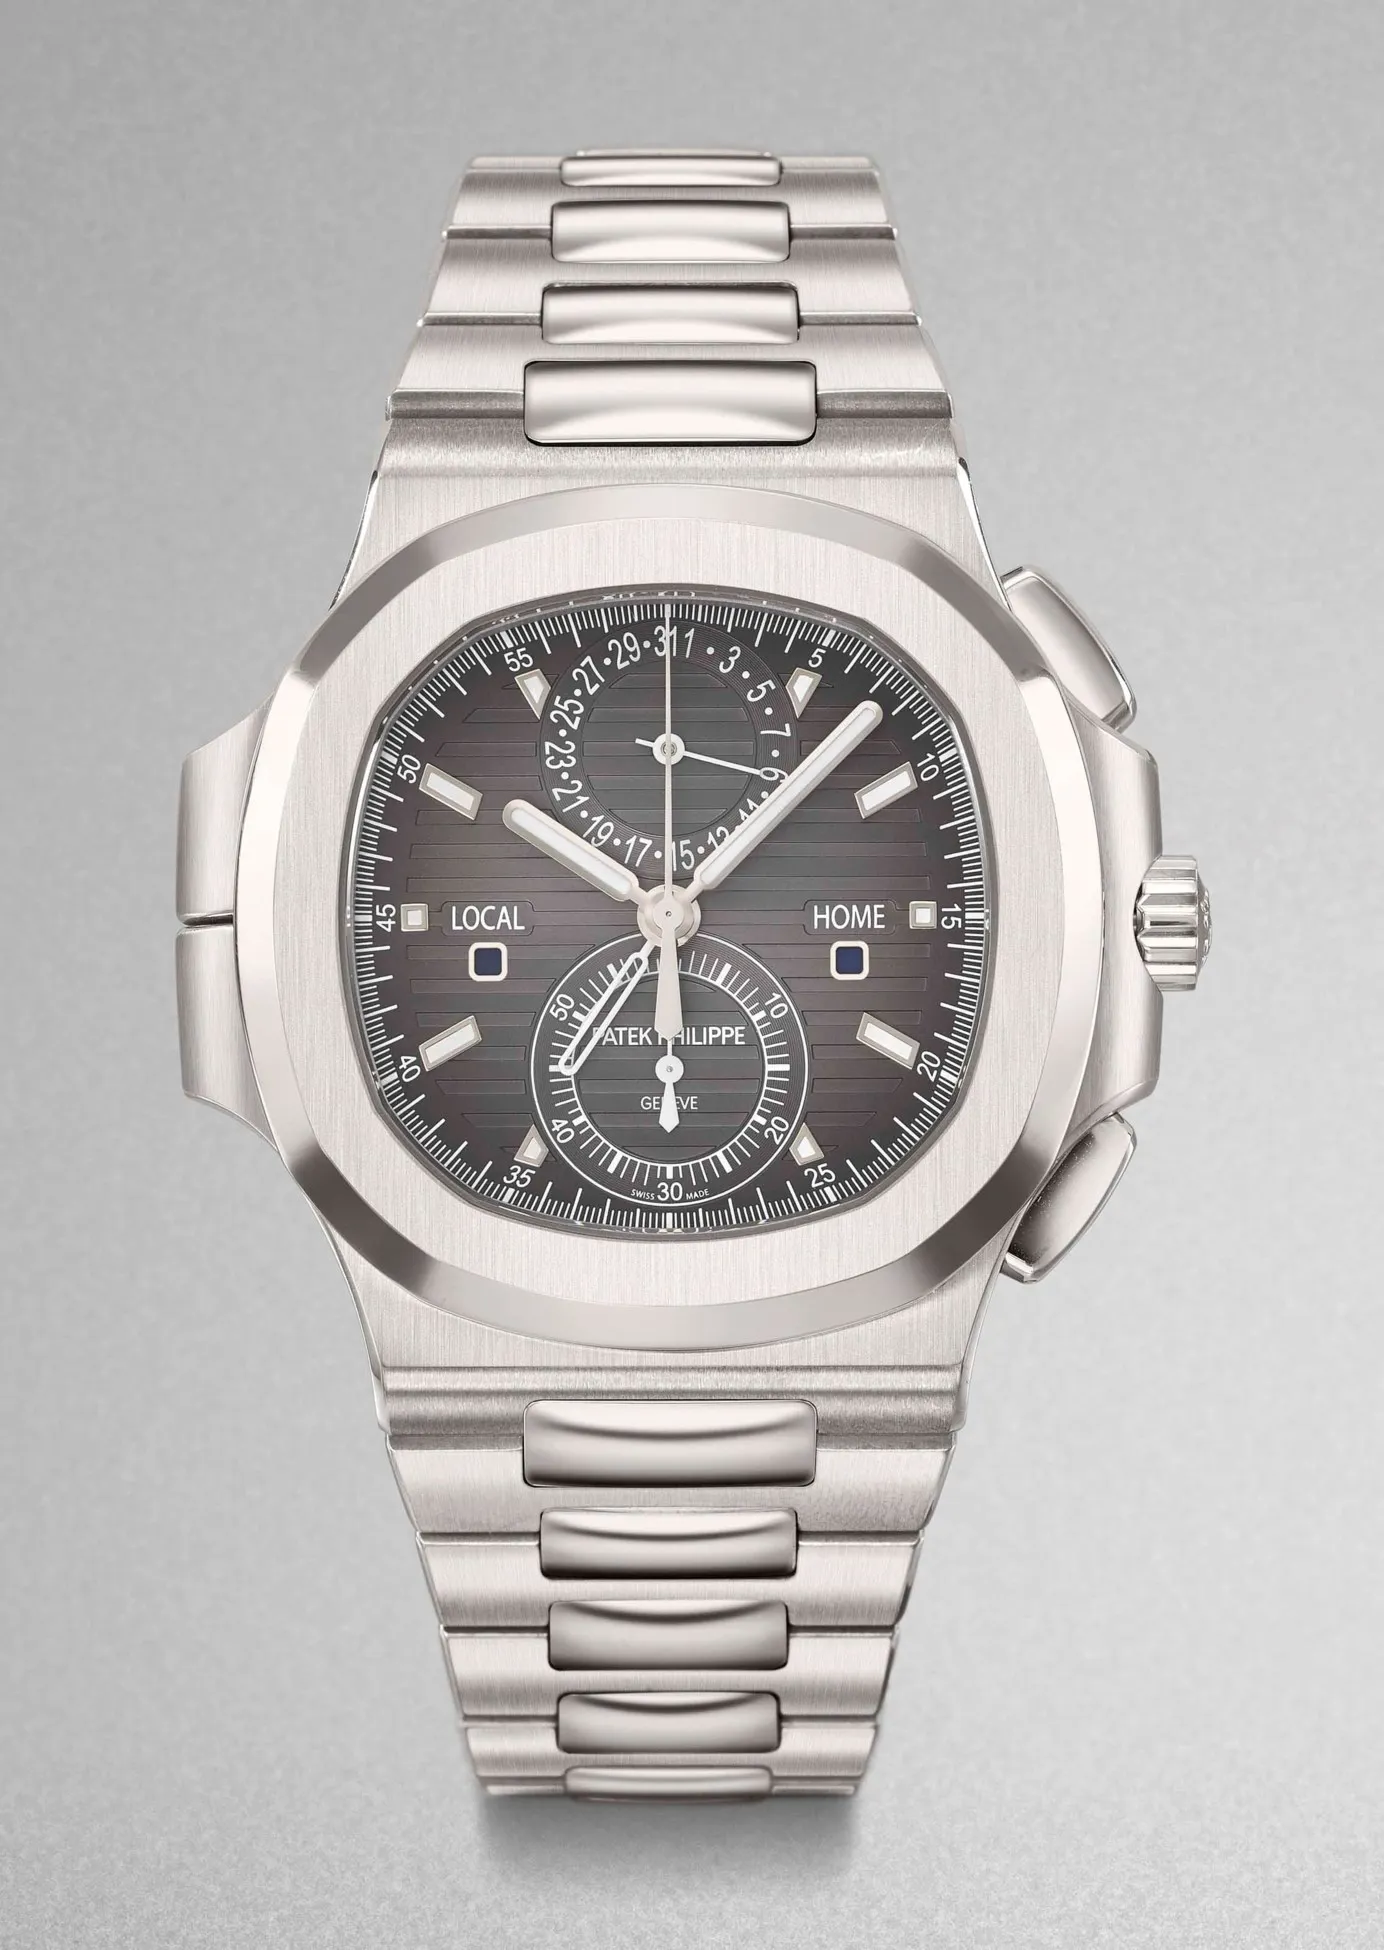 Patek Philippe Nautilus 5990/1A-001 40.5mm Stainless steel Grey